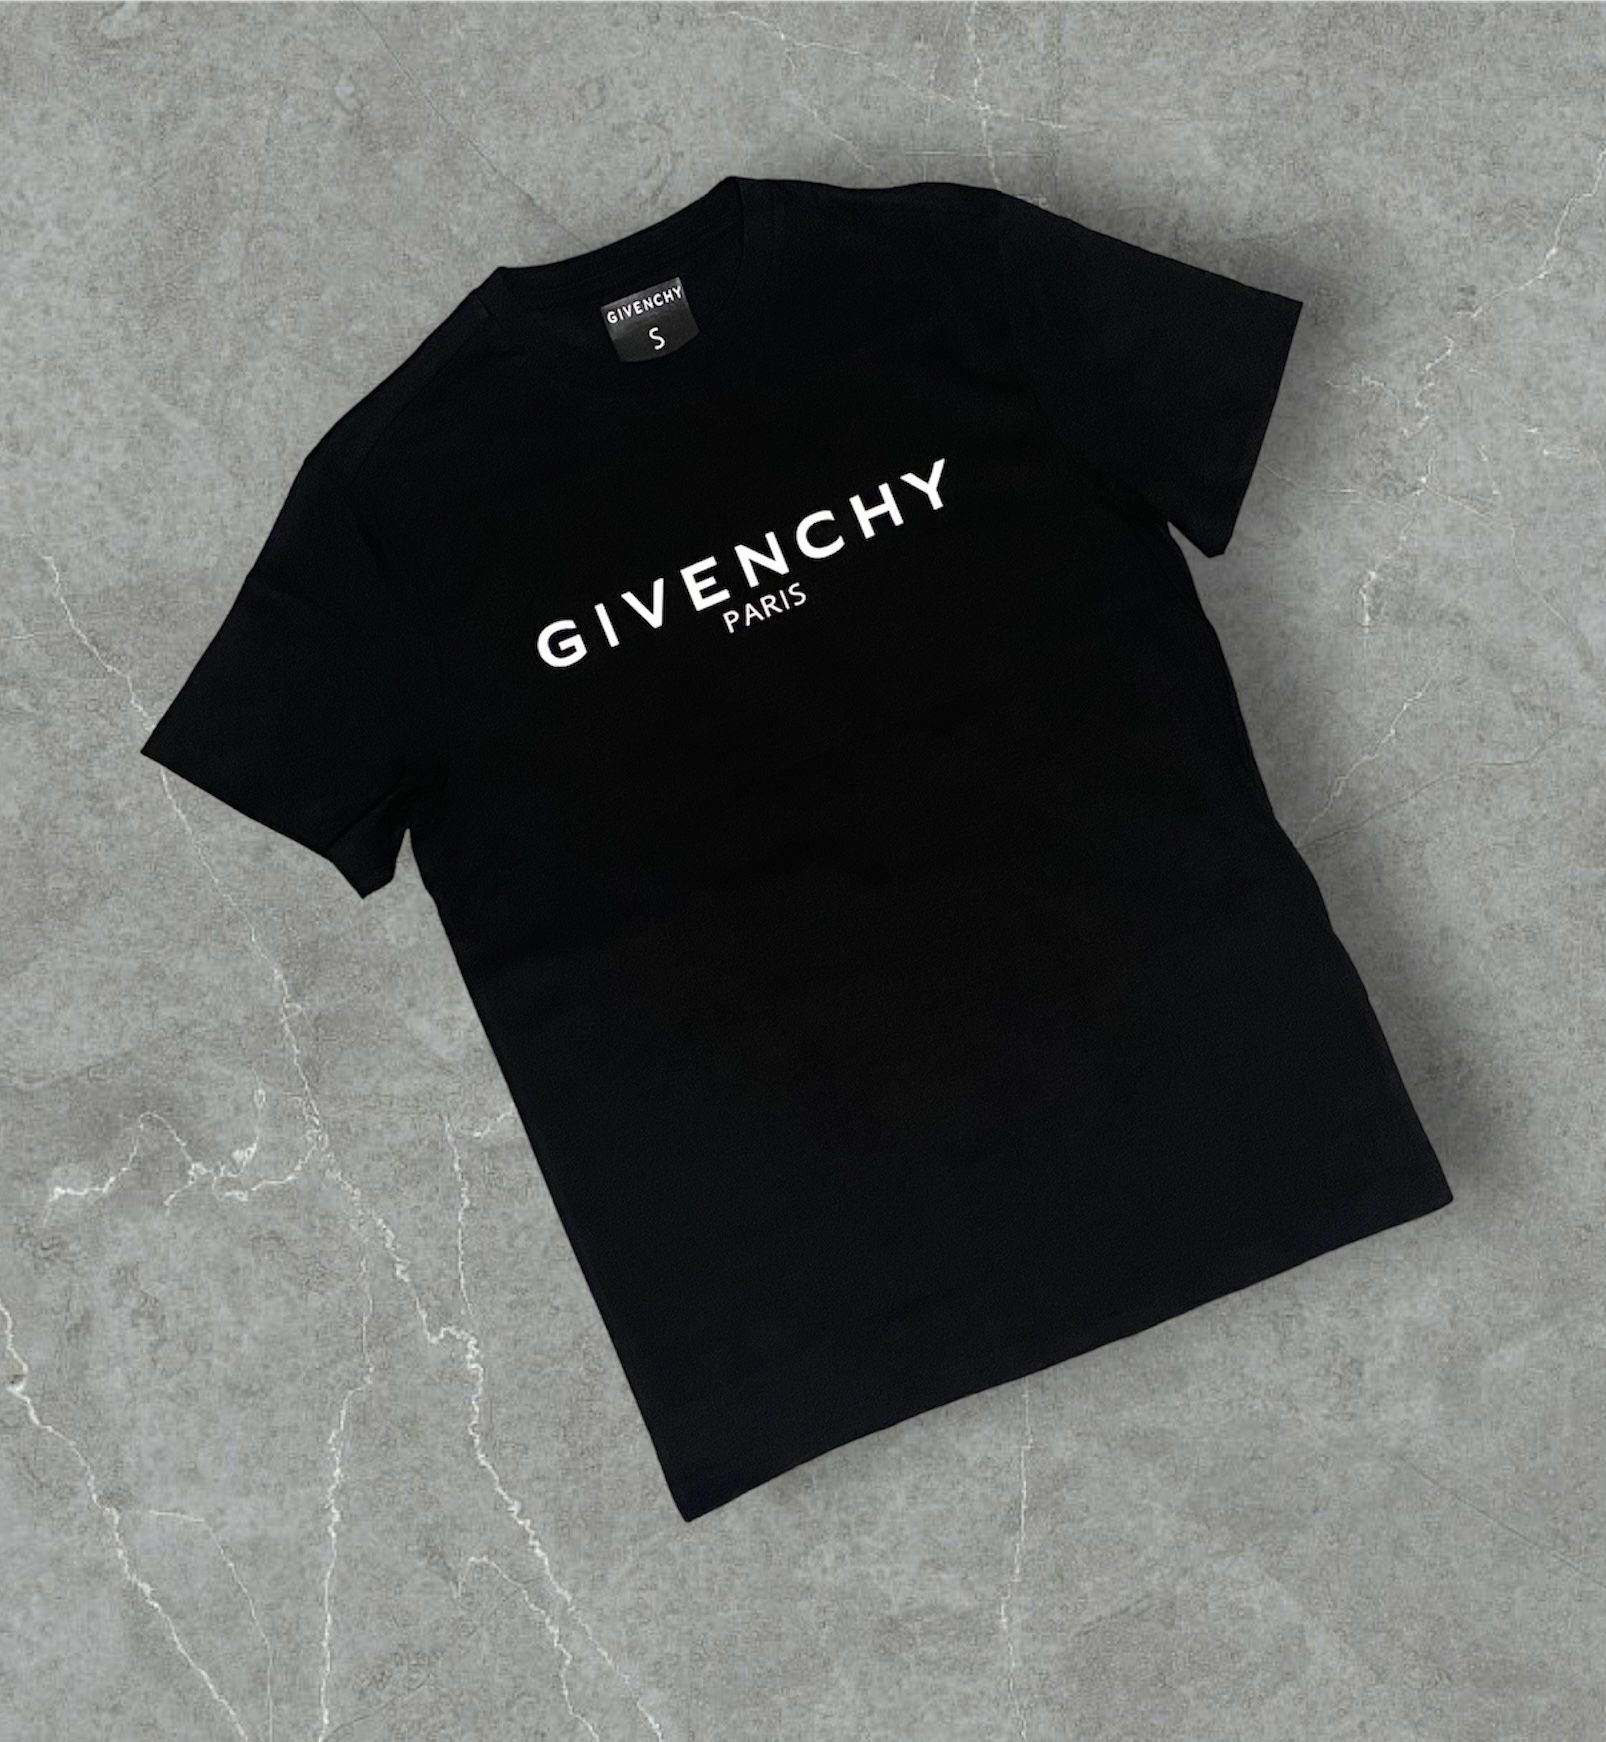 Givenchy T-shirt Black And White 